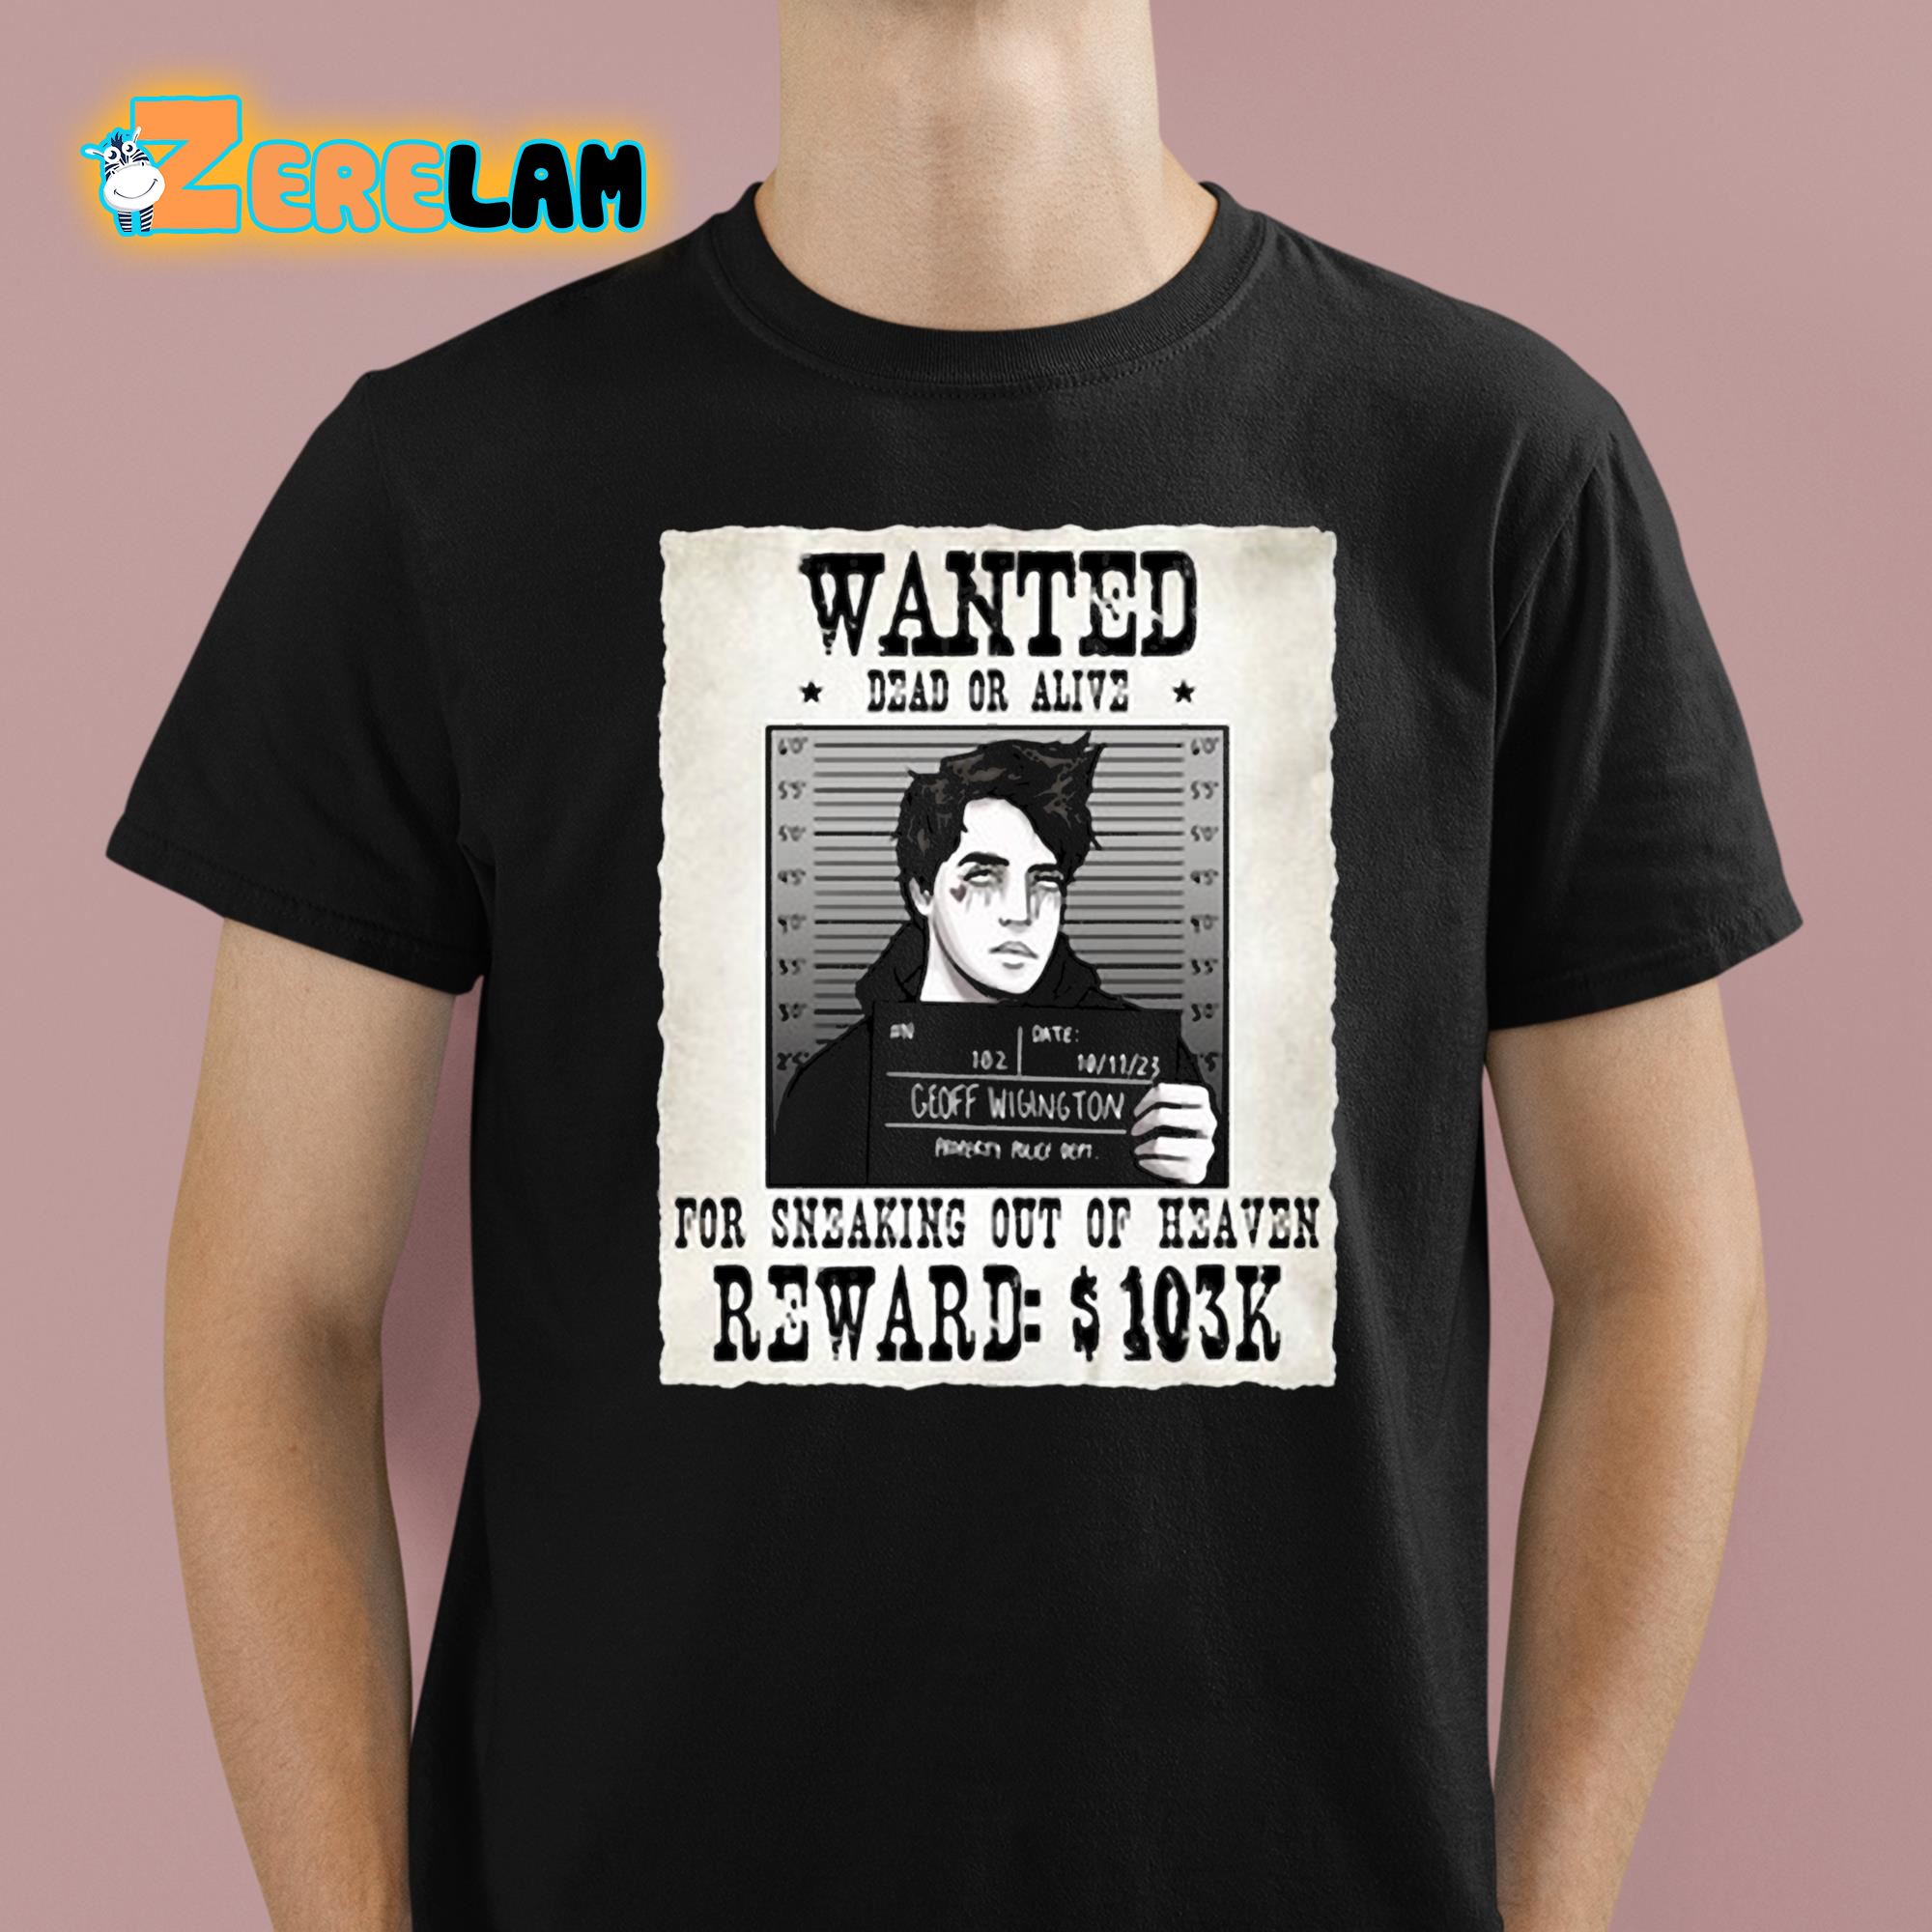 Geoff Wigington Wanted Dead Or Alive For Sneaking Out Of Heaven Shirt 1 1